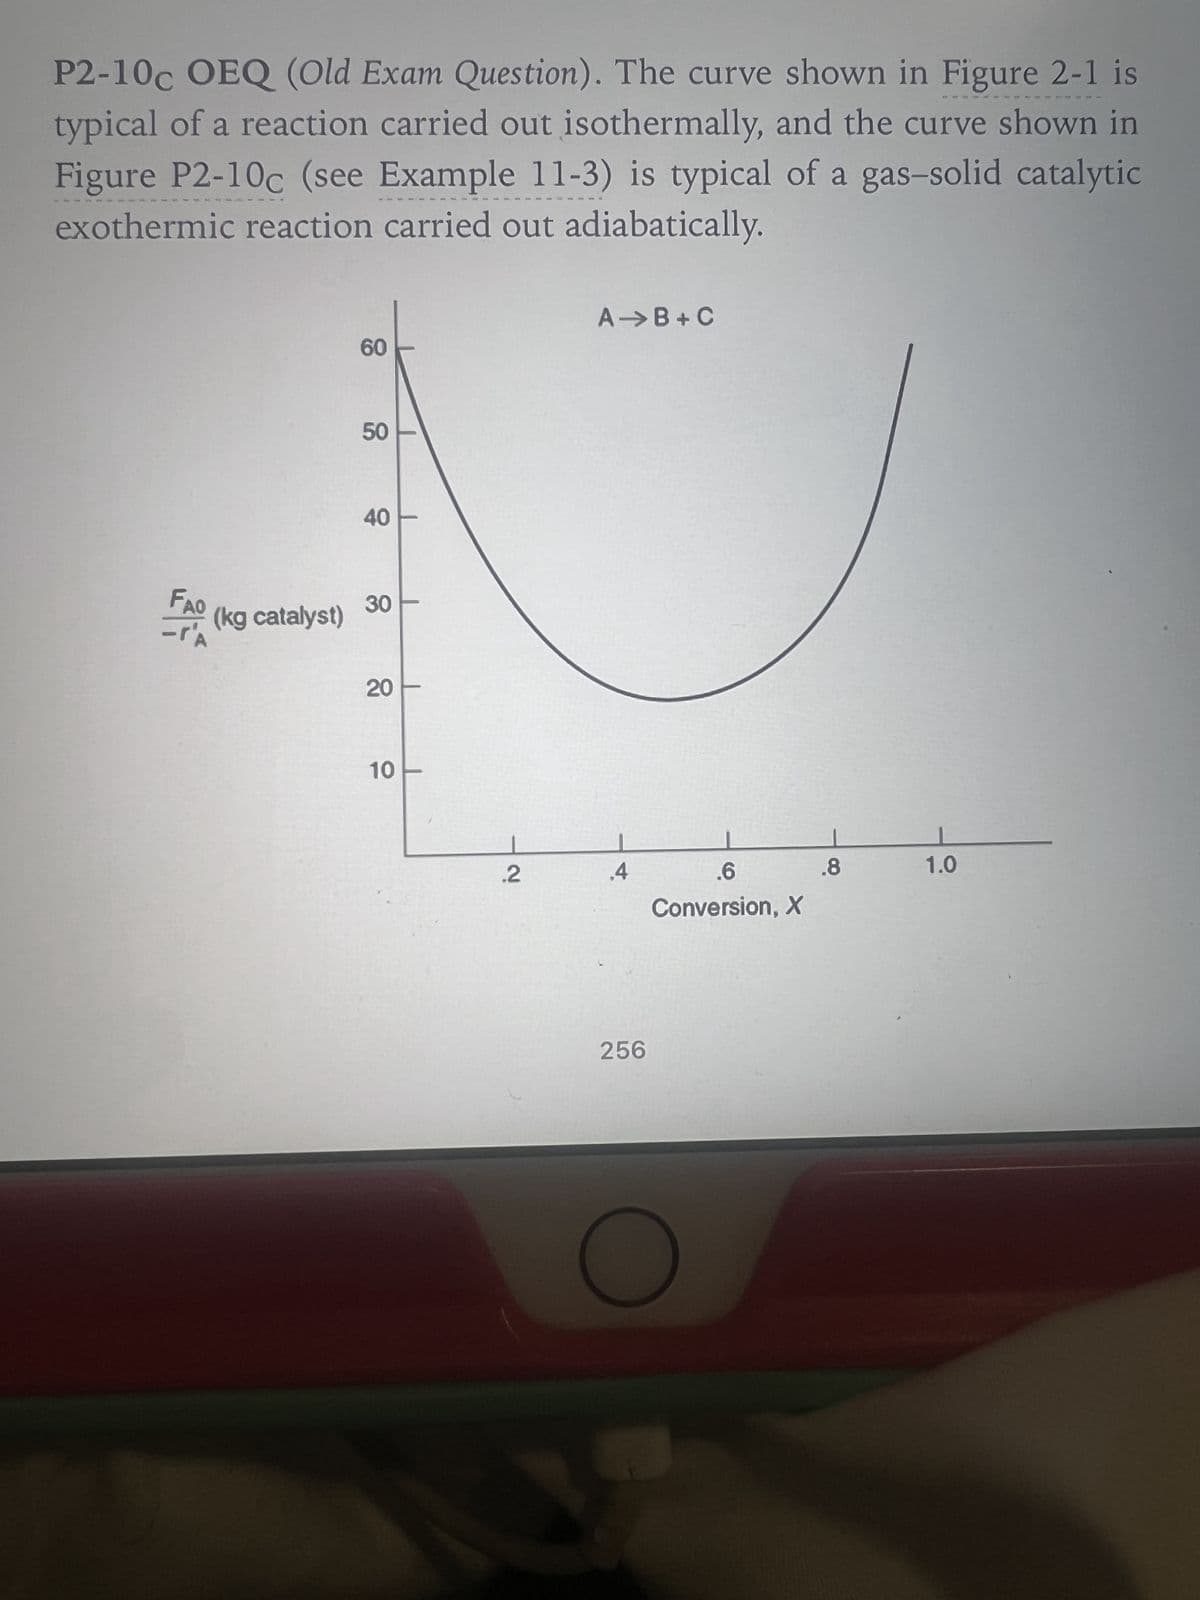 P2-10c OEQ (Old Exam Question). The curve shown in Figure 2-1 is
typical of a reaction carried out isothermally, and the curve shown in
Figure P2-10c (see Example 11-3) is typical of a gas-solid catalytic
exothermic reaction carried out adiabatically.
60
50
40
FA (kg catalyst) 30
20
10
.2
A⇒B+C
.4
256
.6
Conversion, X
.8
1.0